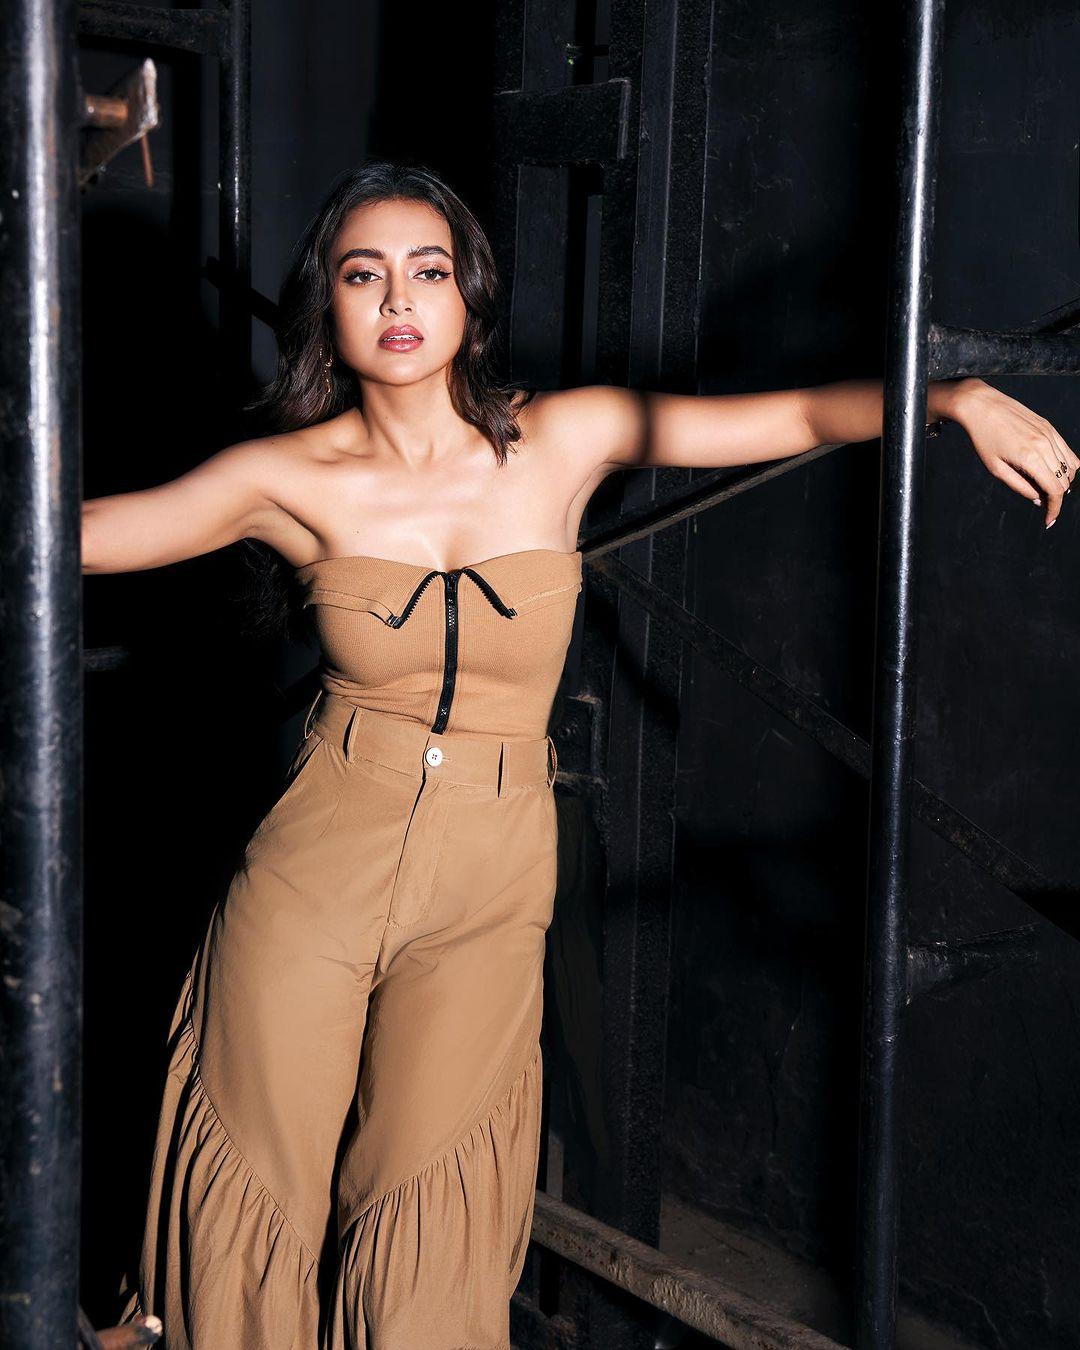 She opts for a beige strapless zipper top, gracefully accentuating her silhouette and embracing a departure from winter blues. Paired with stylish harem pants, the ensemble showcases Tejasswi's bold fashion choices